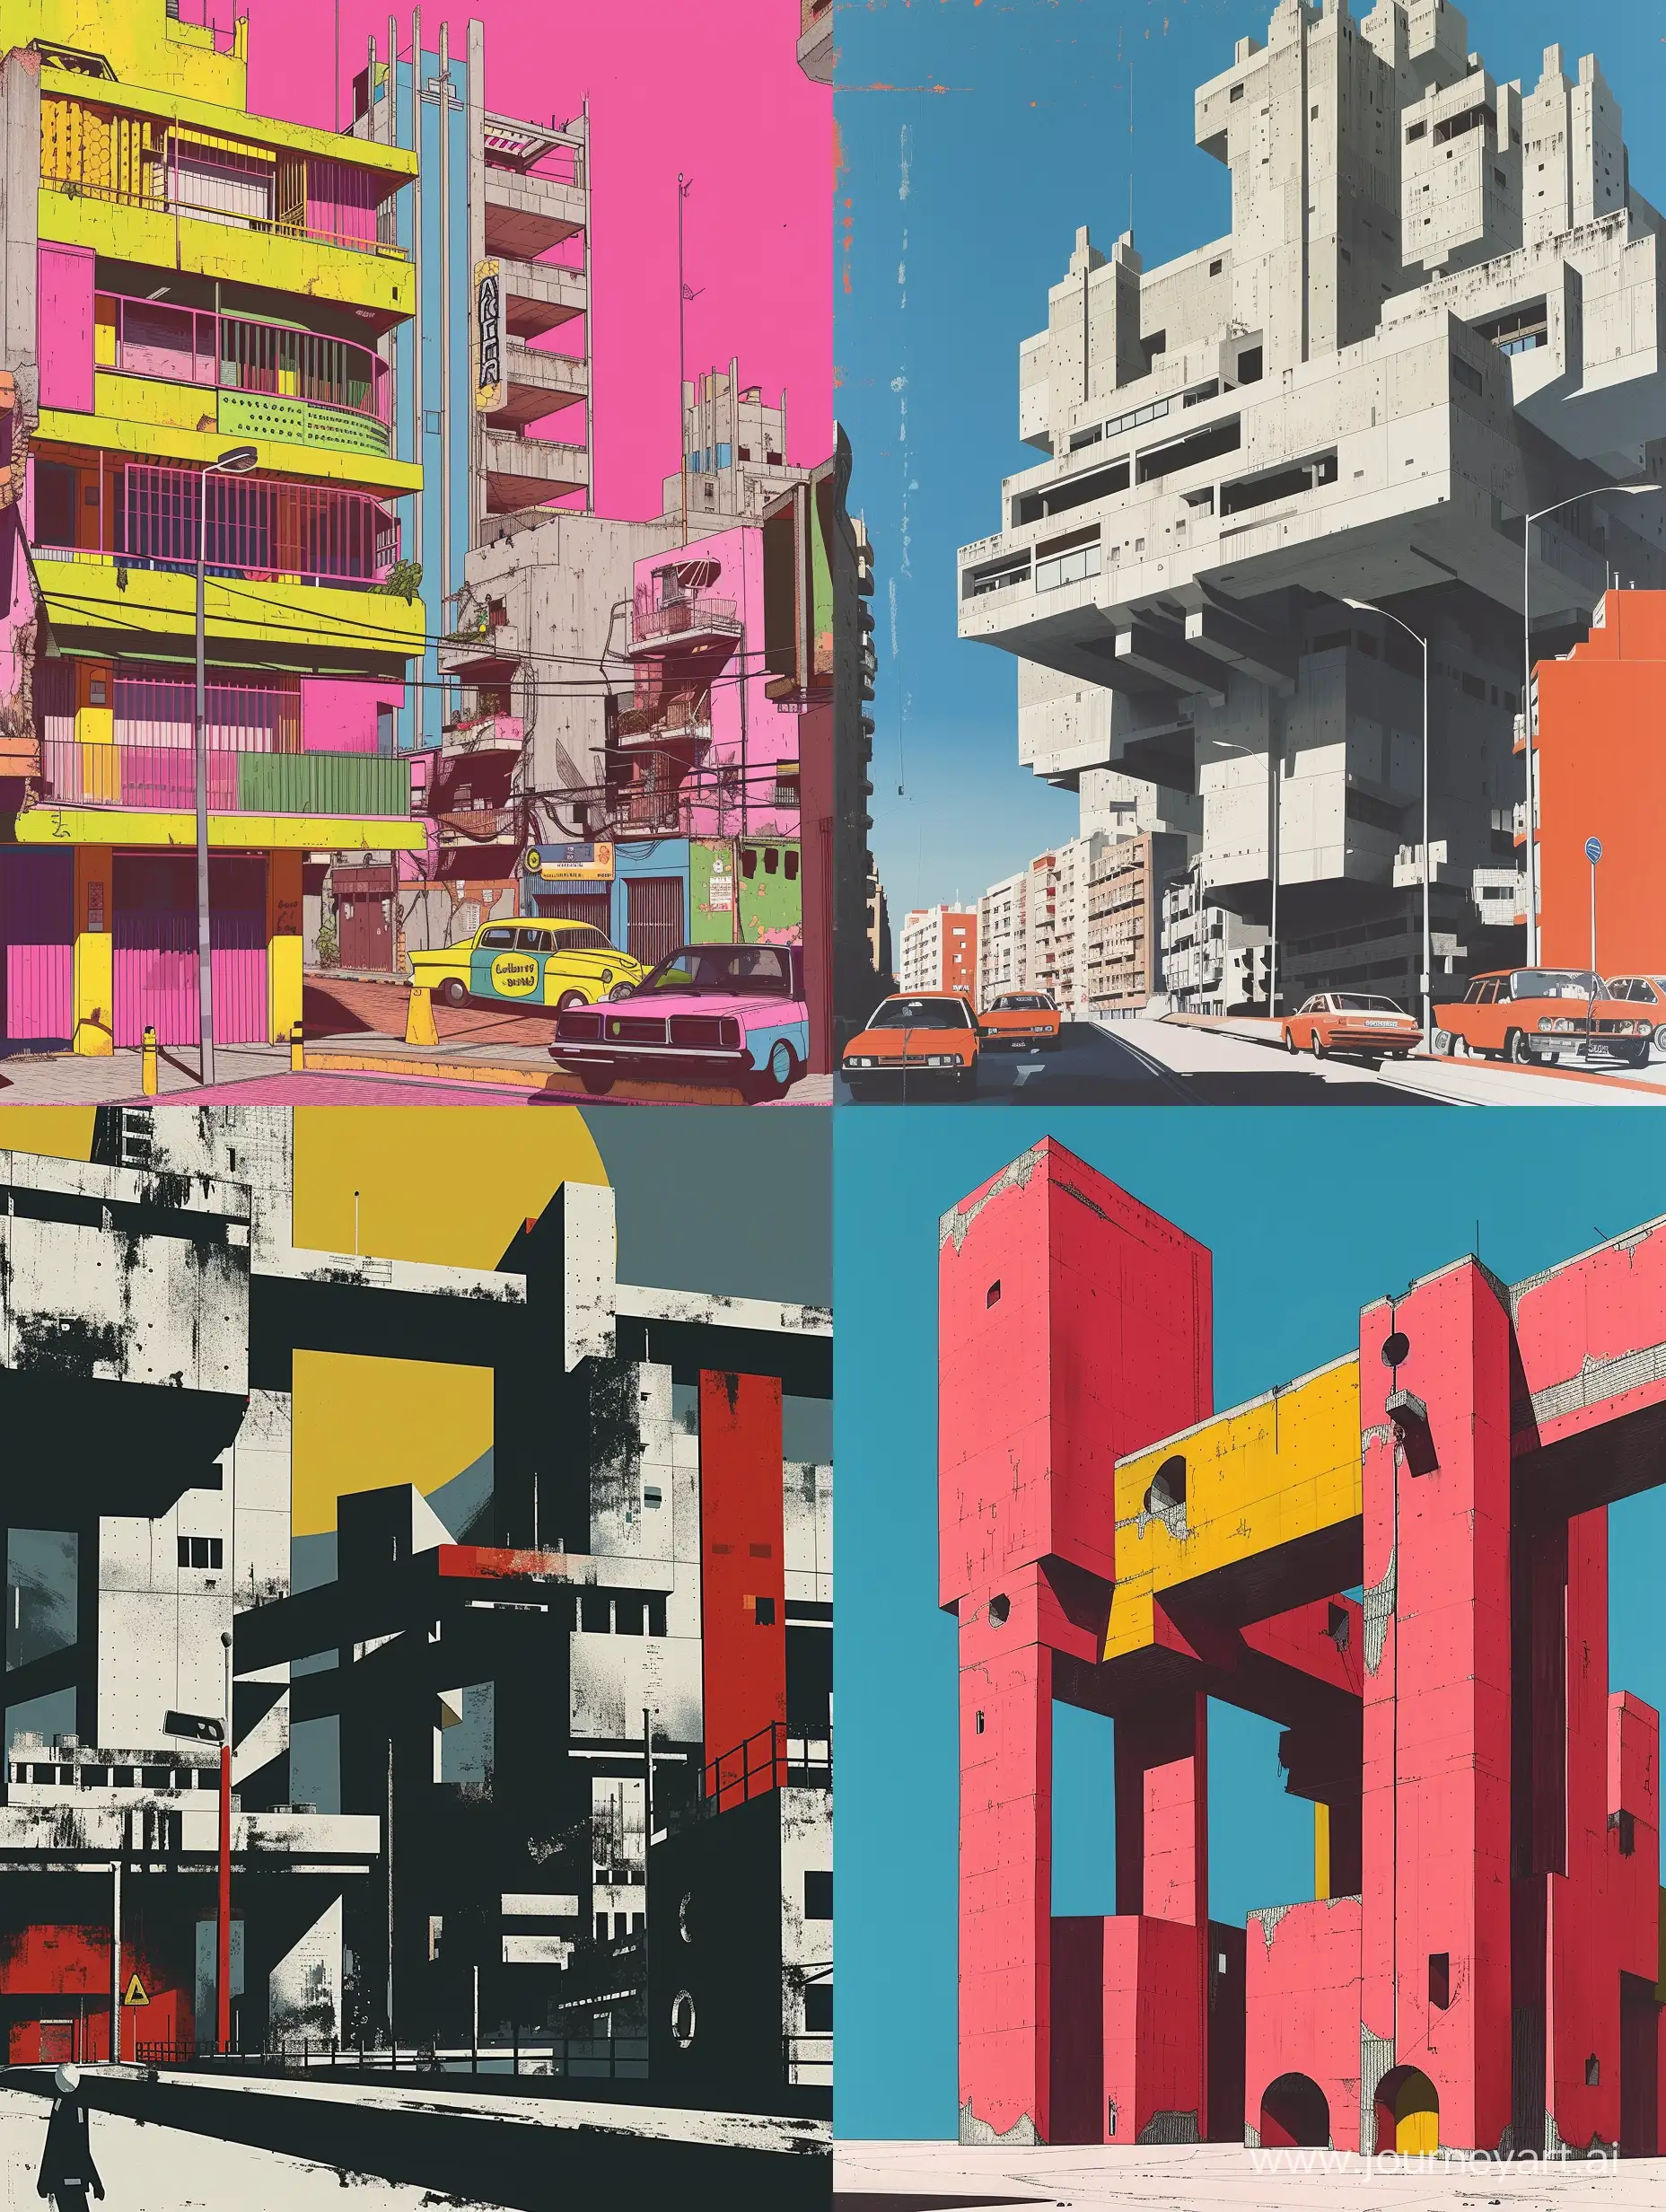 City Pop Art Style Brutalism structure Scene Inspired by Hiroshi Nagai in Spain